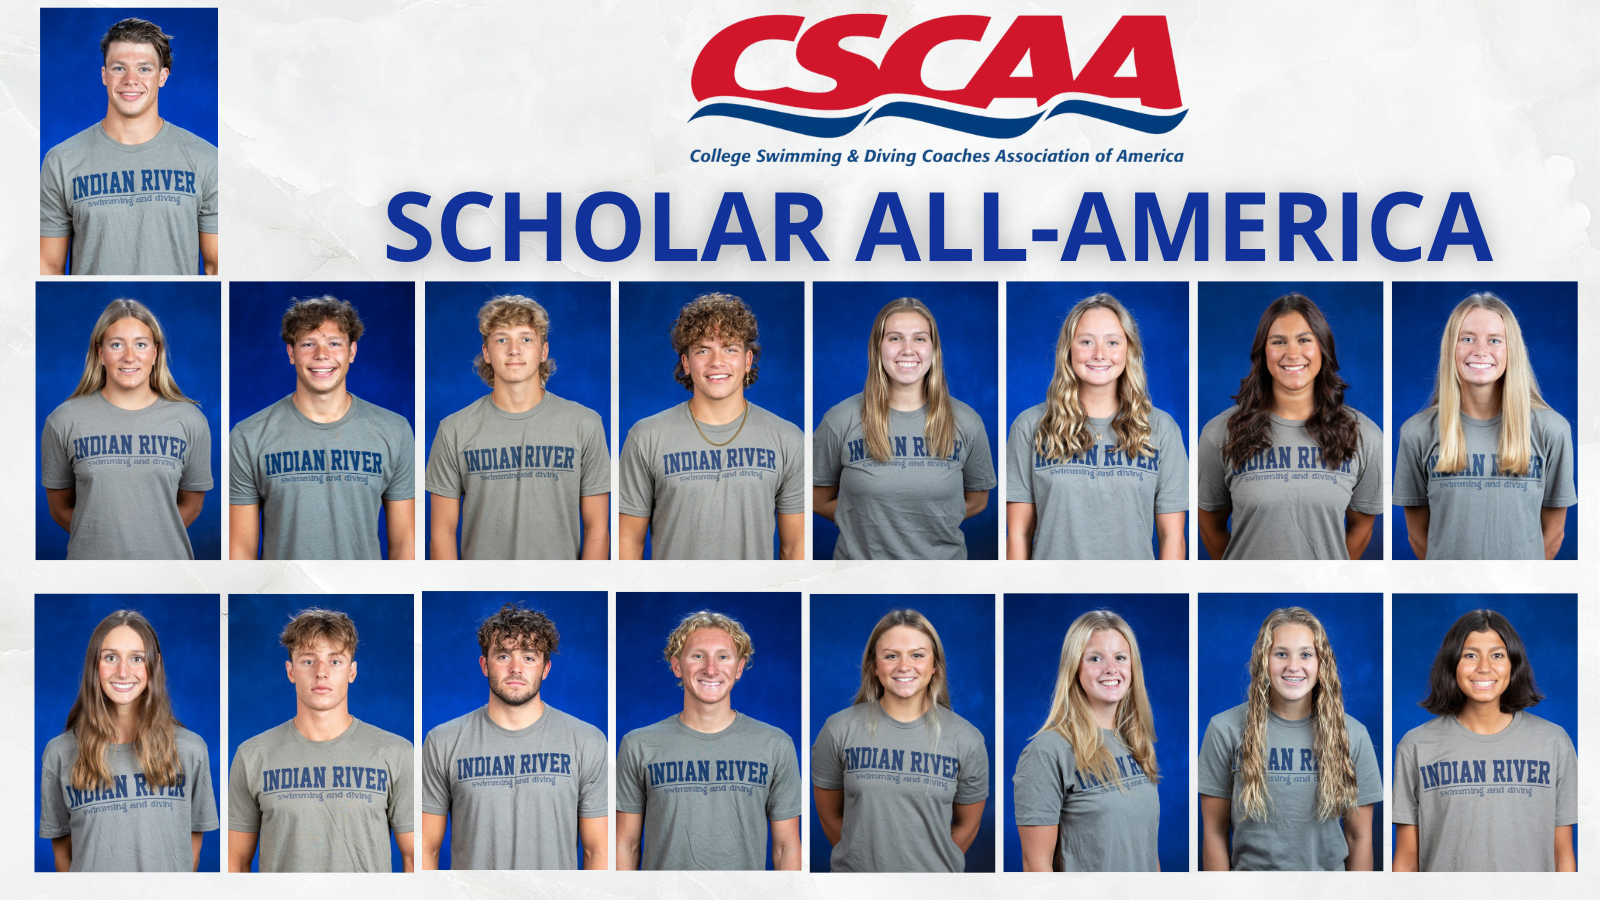 17 Swimmers and Divers selected to the CSCAA Scholar All-America Team